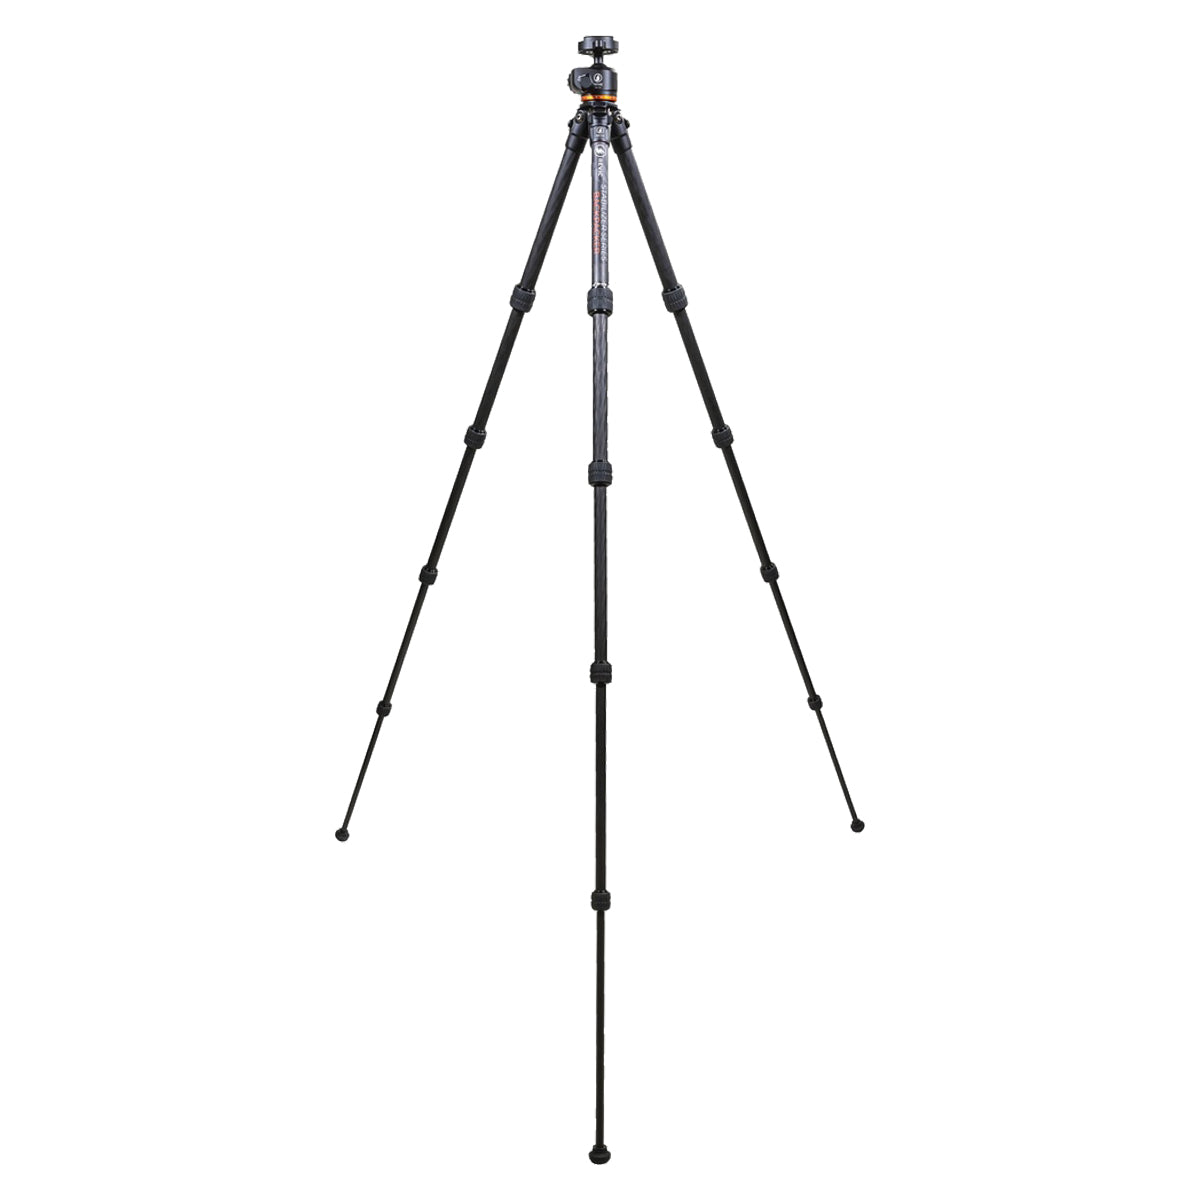 Gunwerks Revic Stabilizer Backpacker Tripod in  by GOHUNT | Revic - GOHUNT Shop